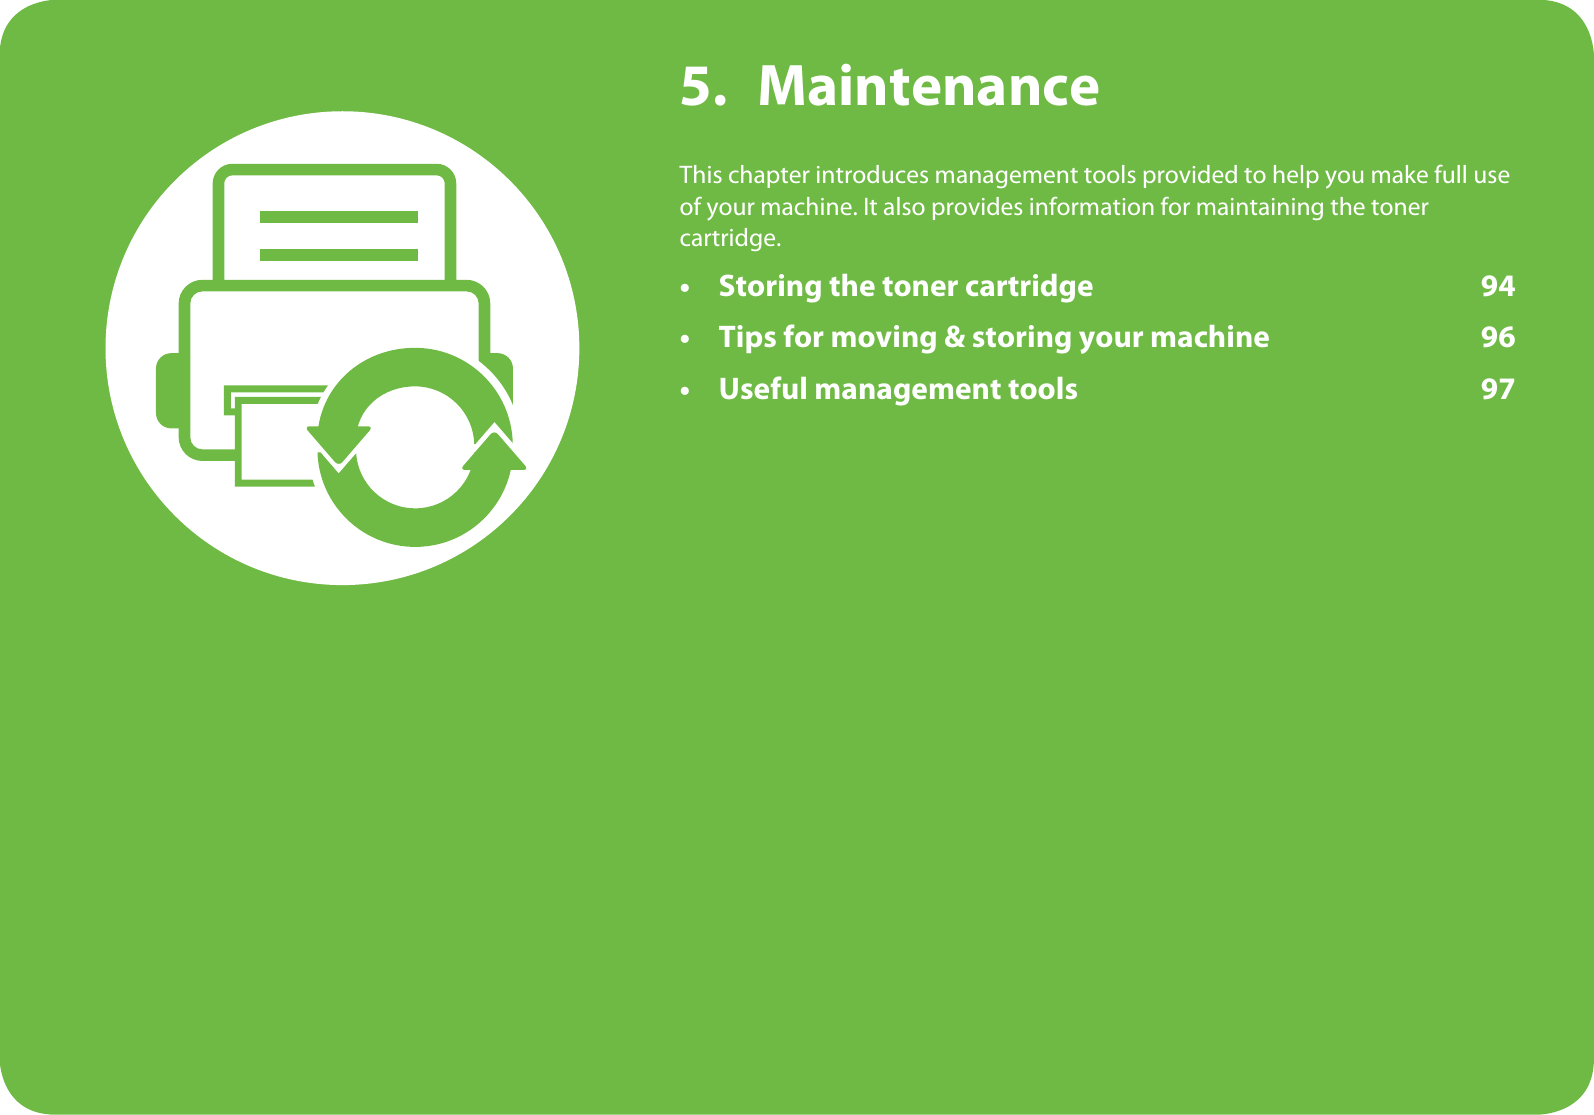 5. MaintenanceThis chapter introduces management tools provided to help you make full use of your machine. It also provides information for maintaining the toner cartridge.• Storing the toner cartridge 94• Tips for moving &amp; storing your machine 96• Useful management tools 97